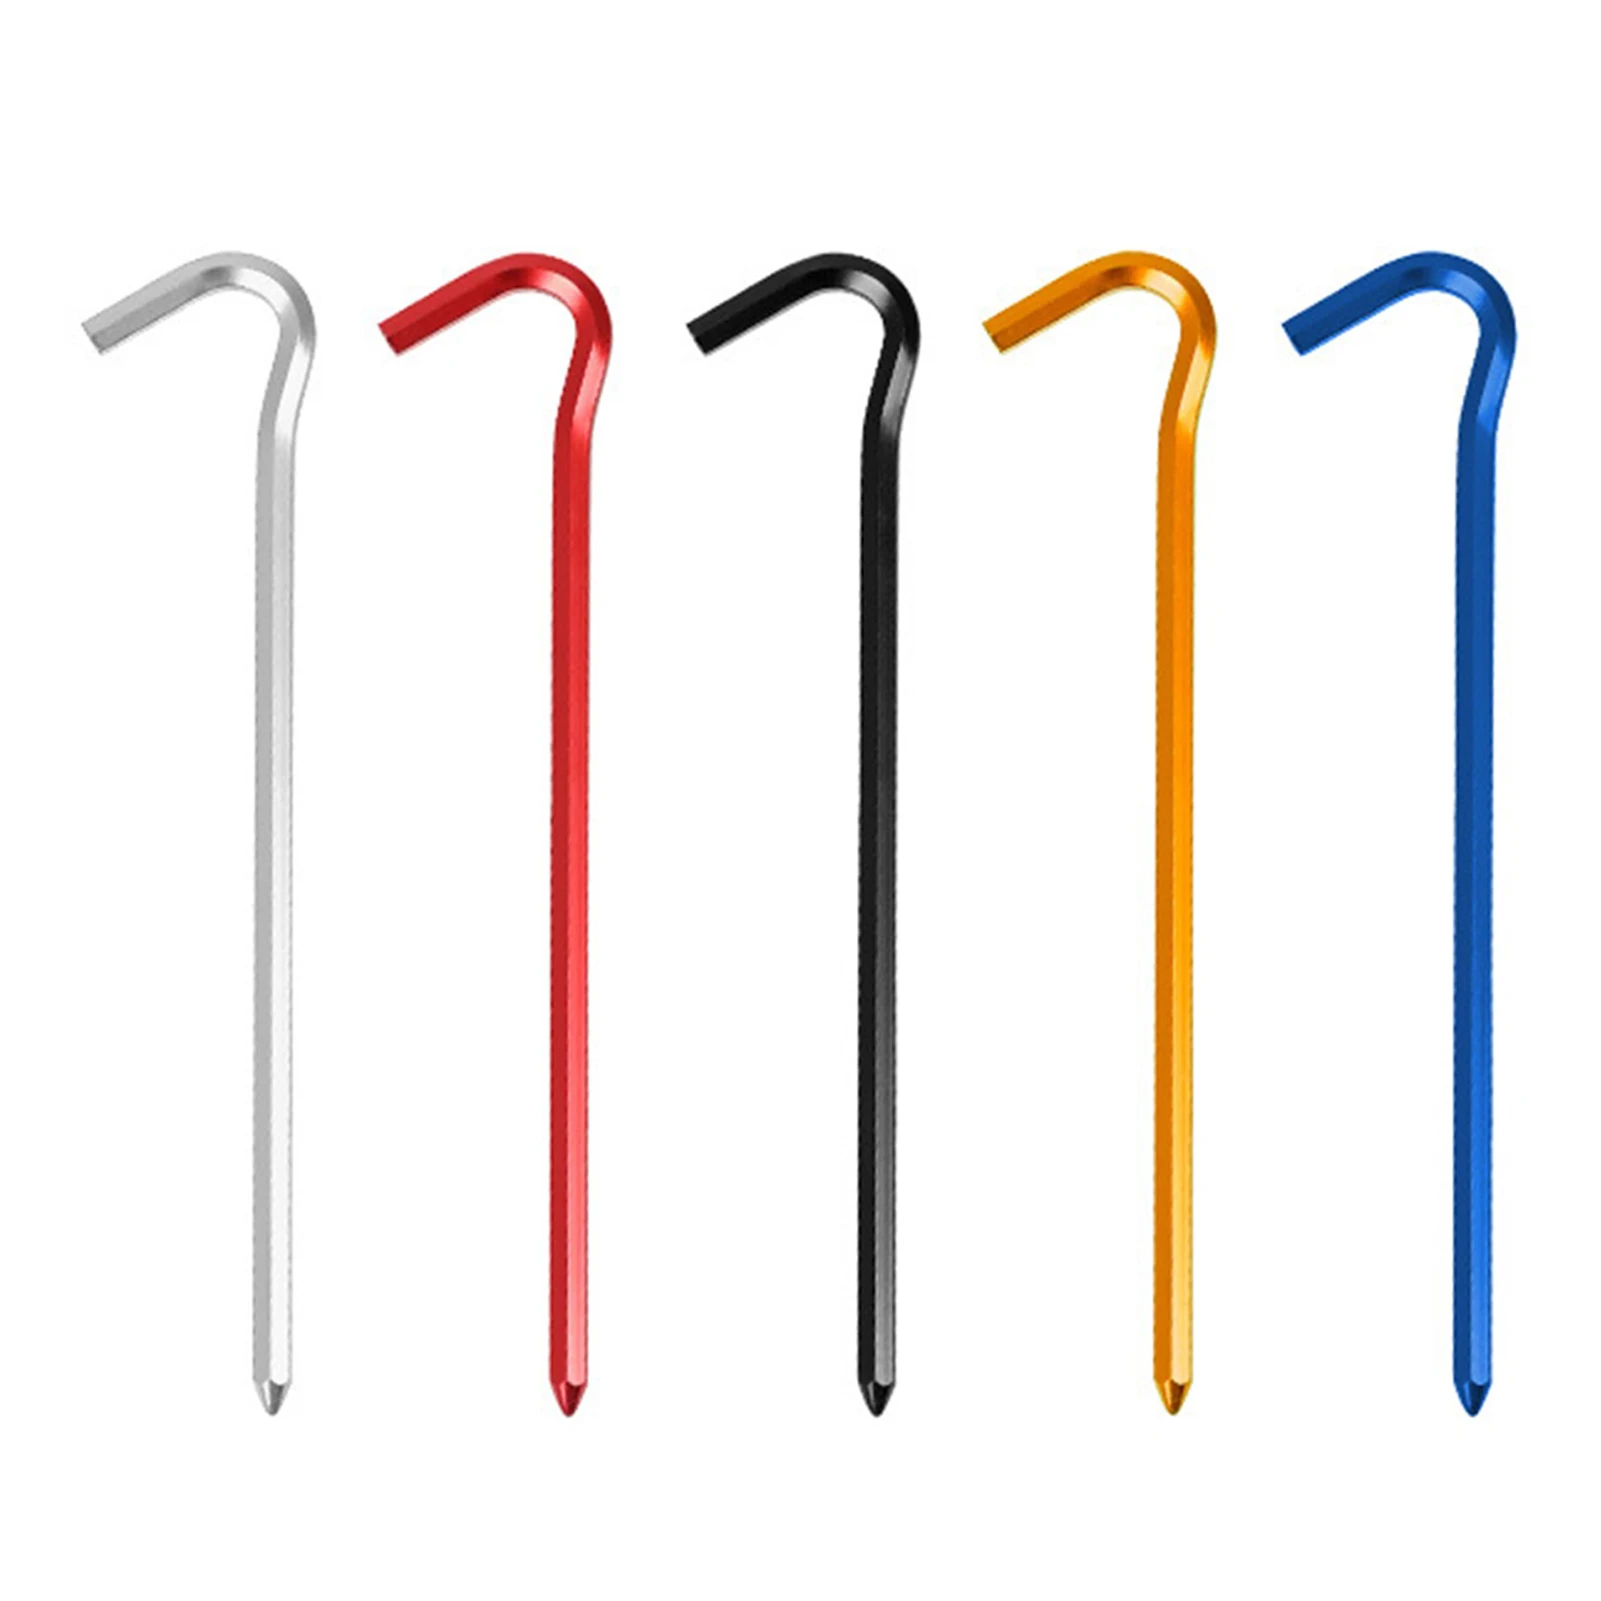 

10Pcs Camping Tent Stakes Non-Rust Camping Family Tent Pegs Garden Stakes For Pitching Camping Tent Canopies Campers Backpackers